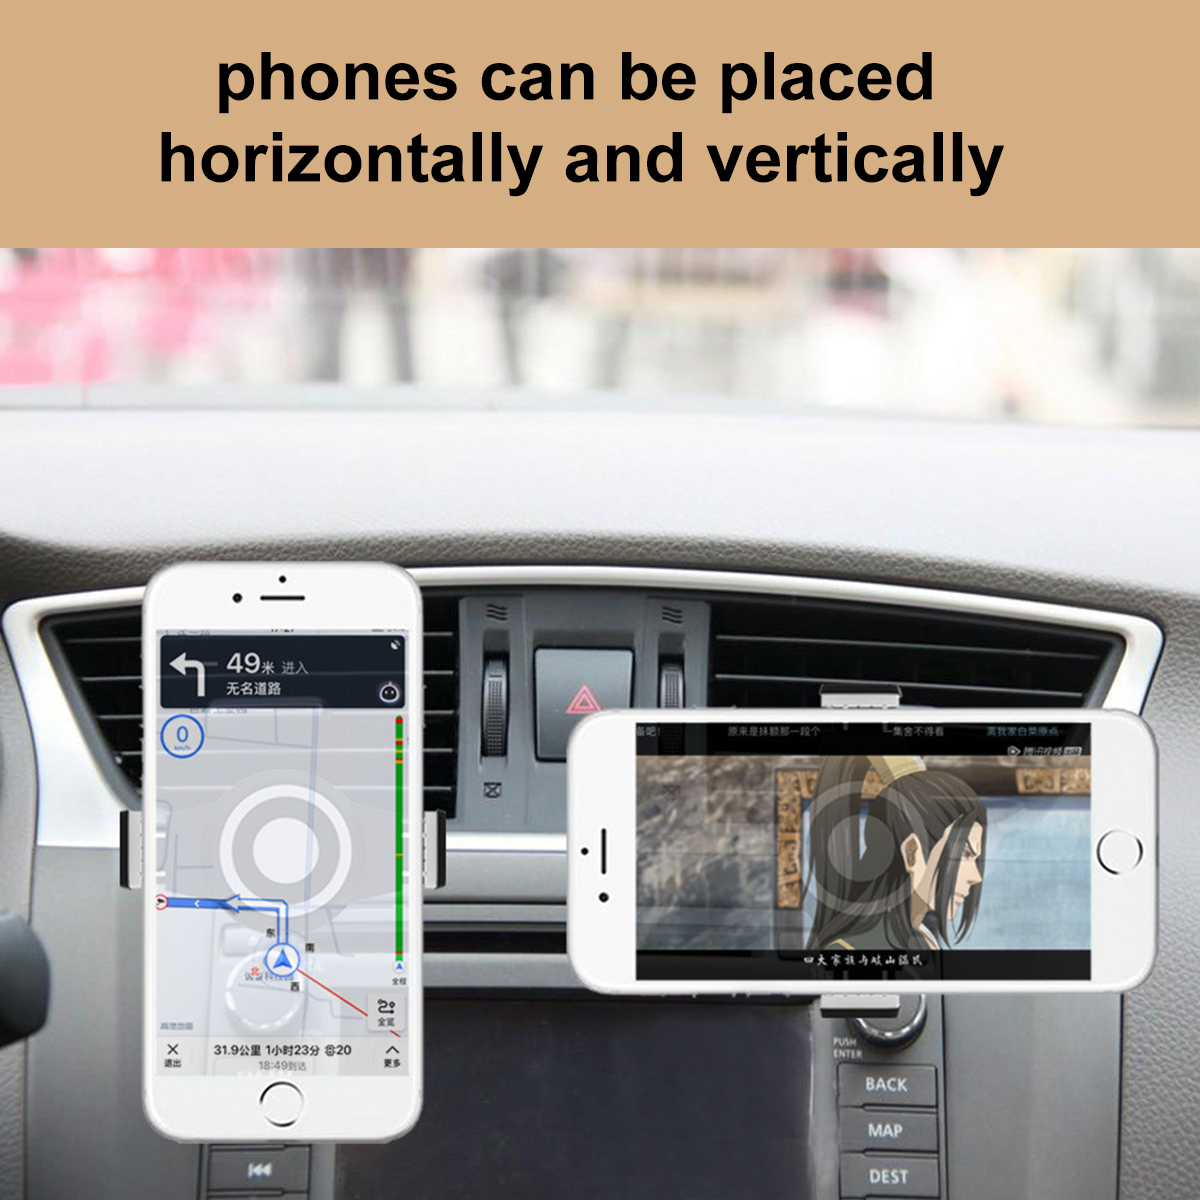 360deg-Rotation-Auto-Lock-Car-Dashboard-Air-Vent-Mobile-Phone-Holder-Stand-Bracket-for-iPhone-12-XS--1821154-4